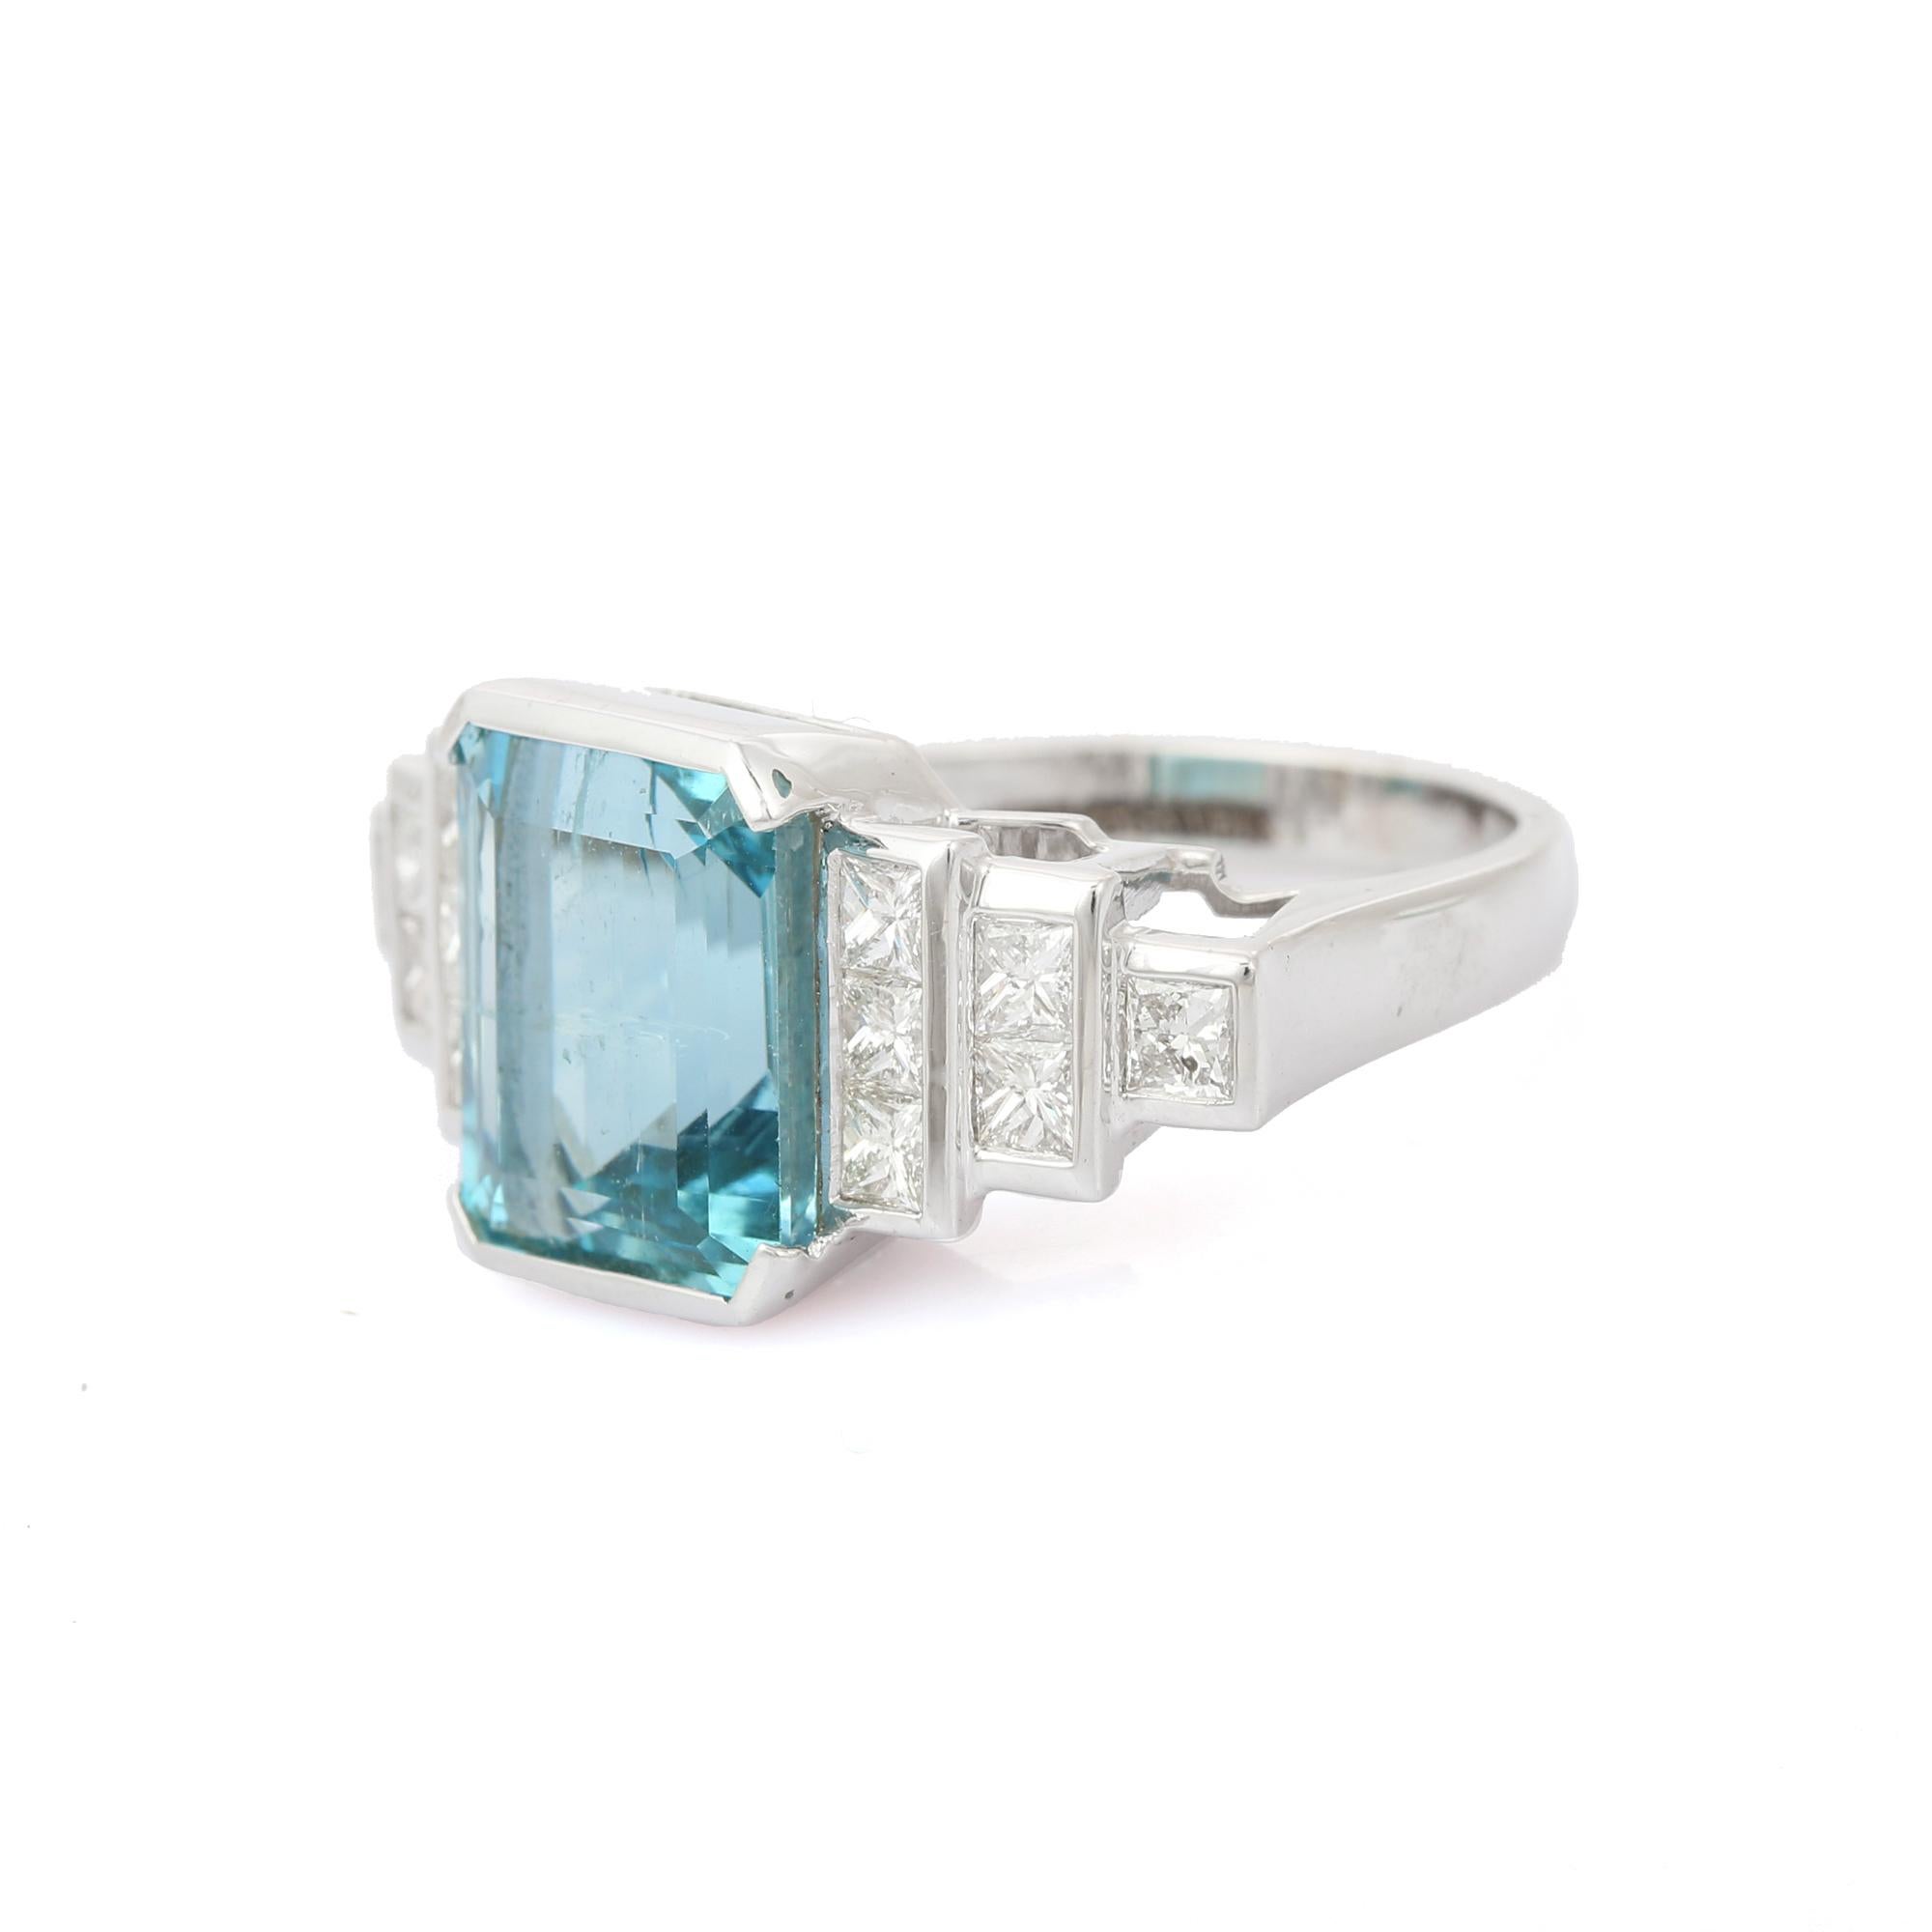 For Sale:  5.79 Carats Aquamarine and Diamond Ring in 18K White Gold 2